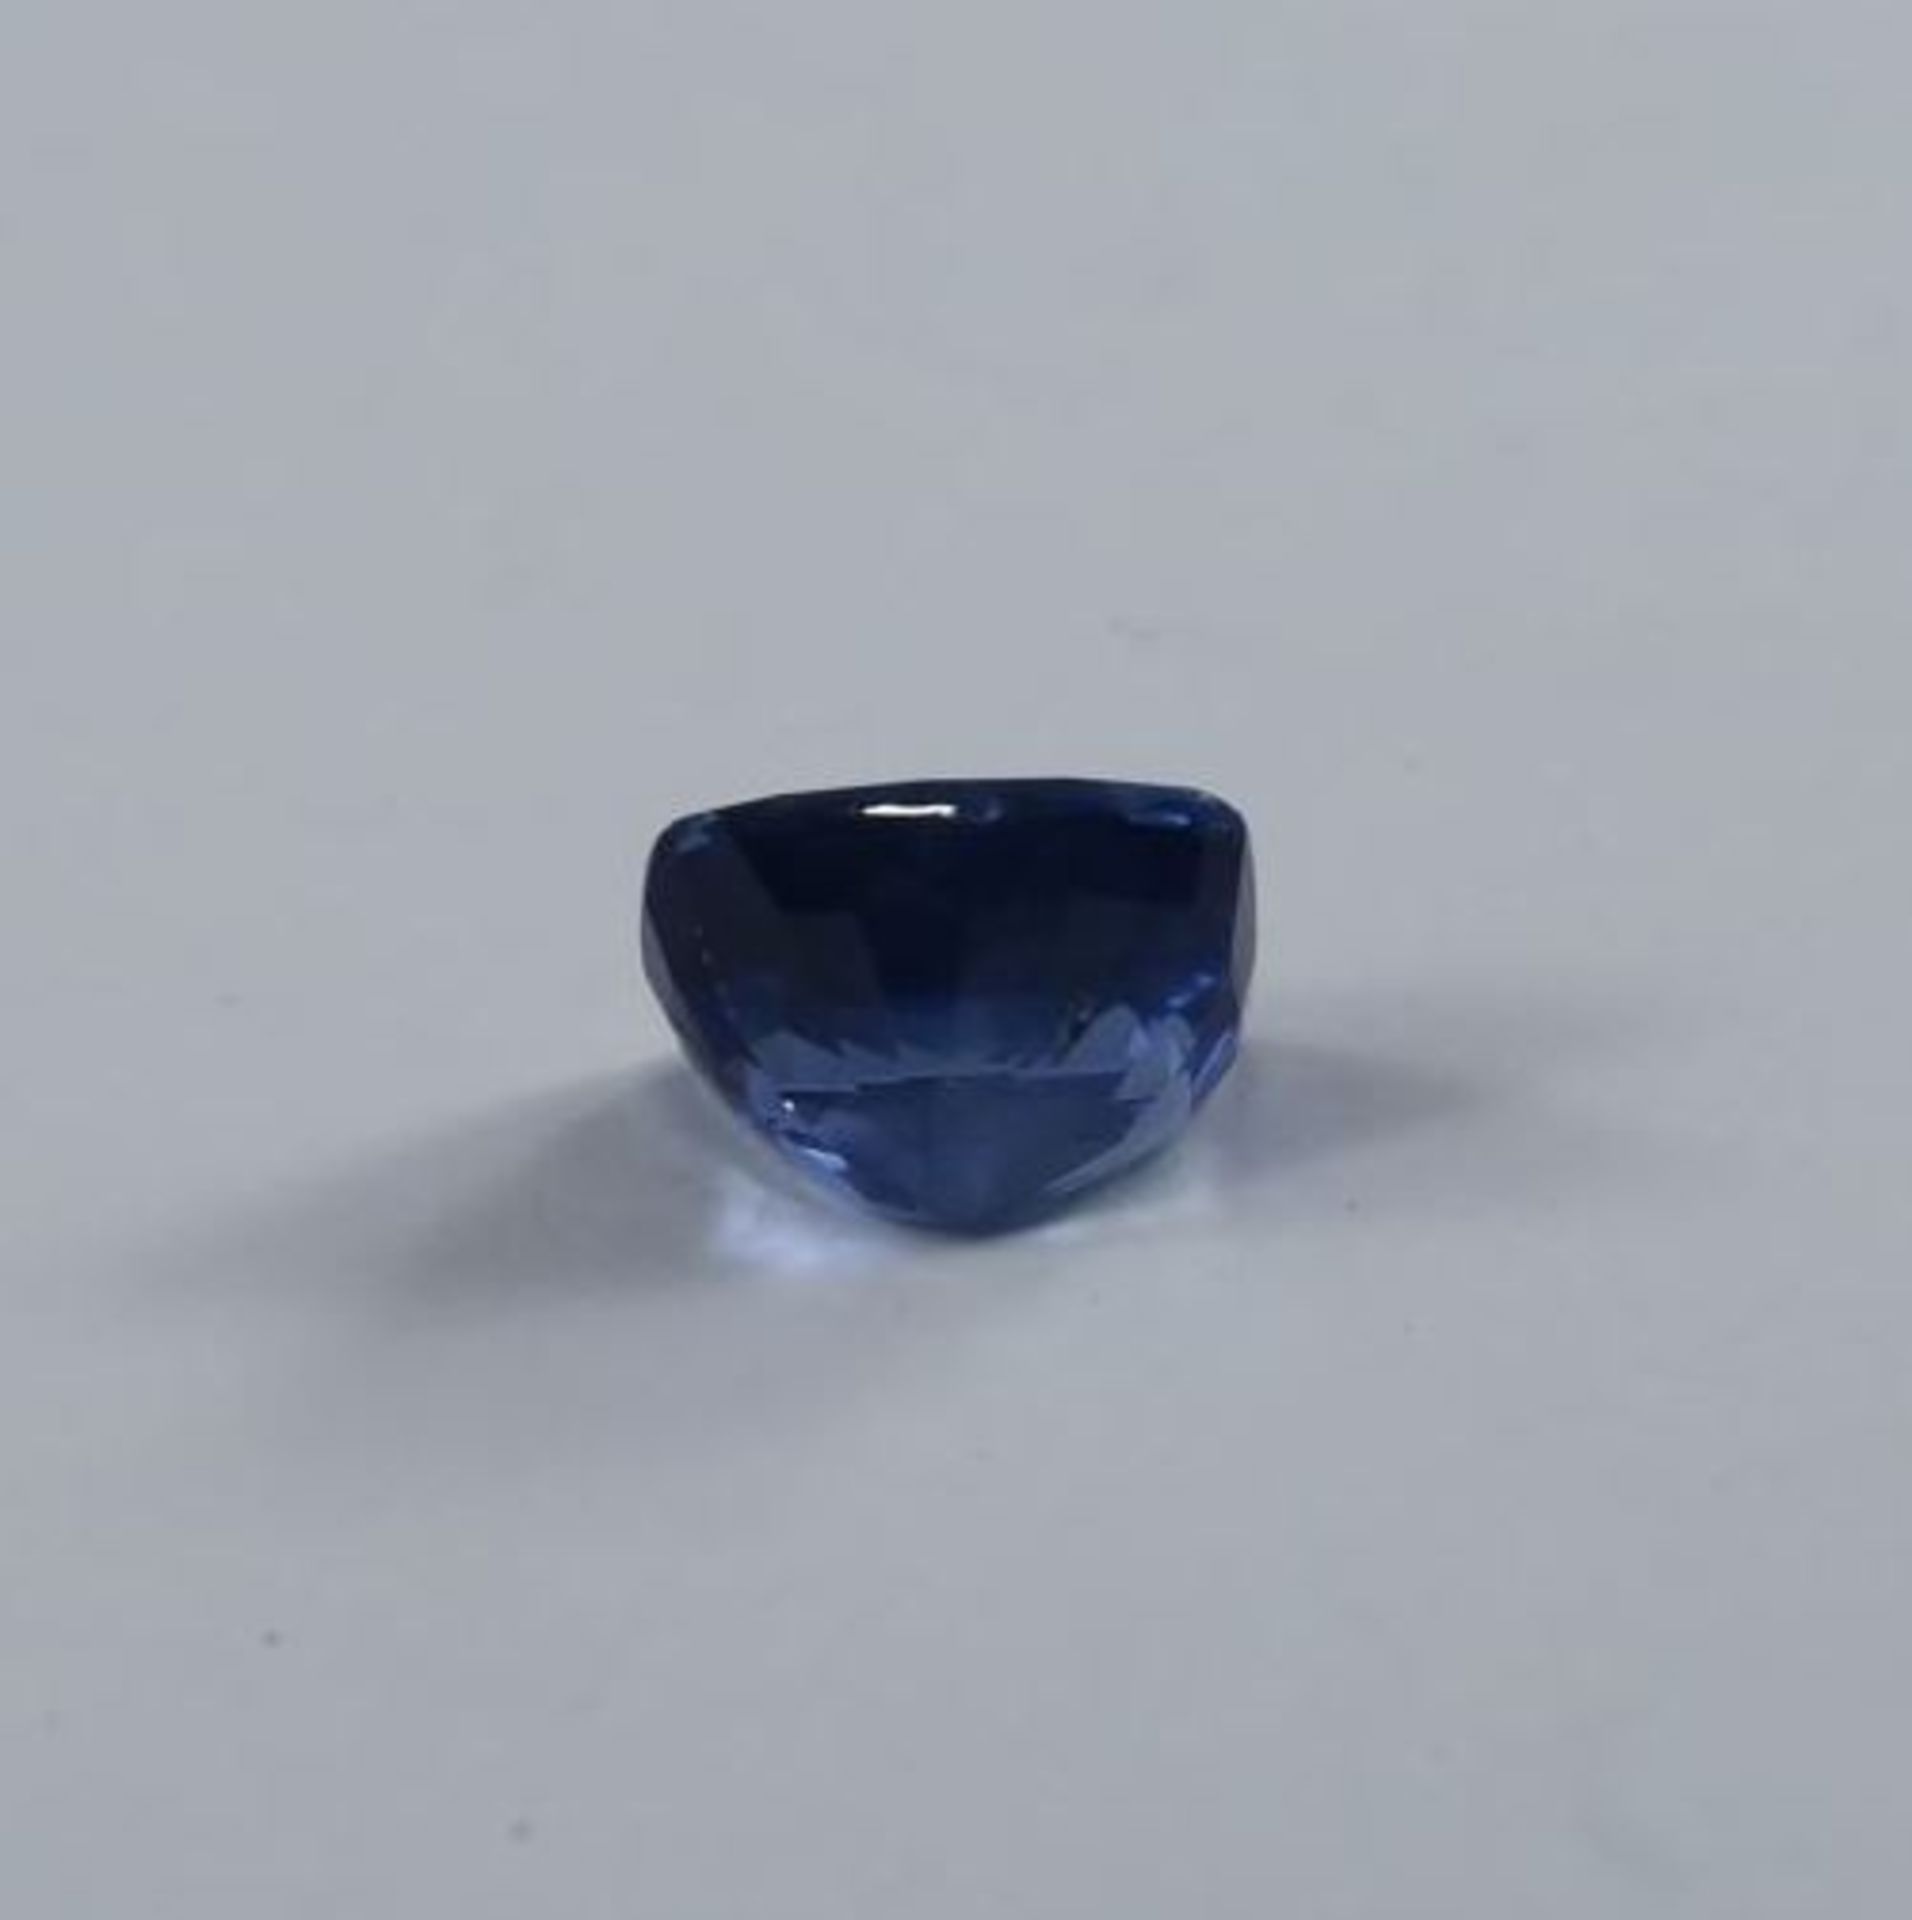 GIA Certified 5.03 ct. Blue Sapphire Untreated - Image 9 of 10